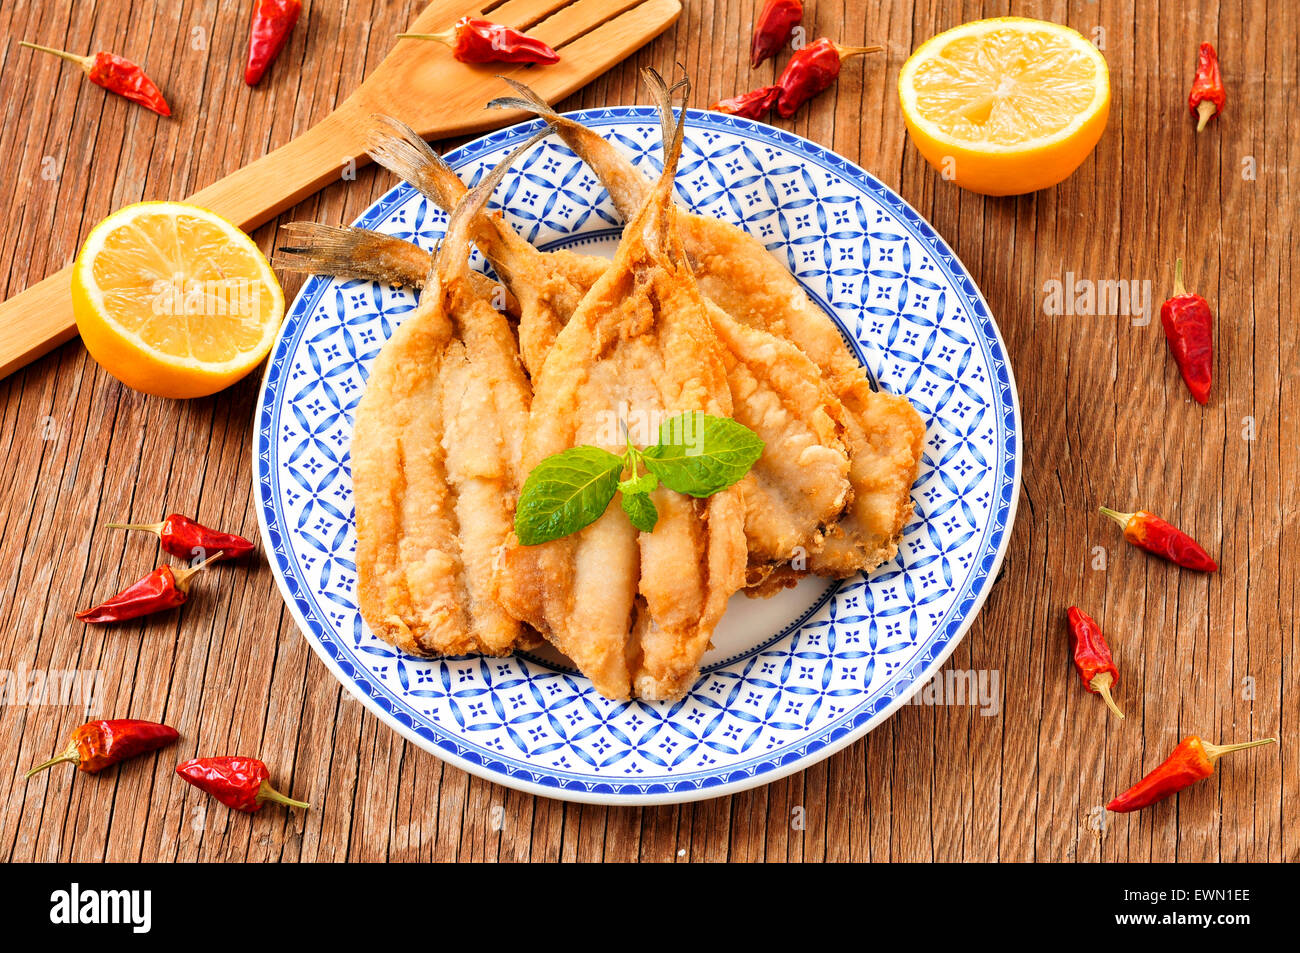 closeup of a plate with spanish boquerones fritos, battered and fried anchovies typical in Spain, on a rustic wooden table Stock Photo